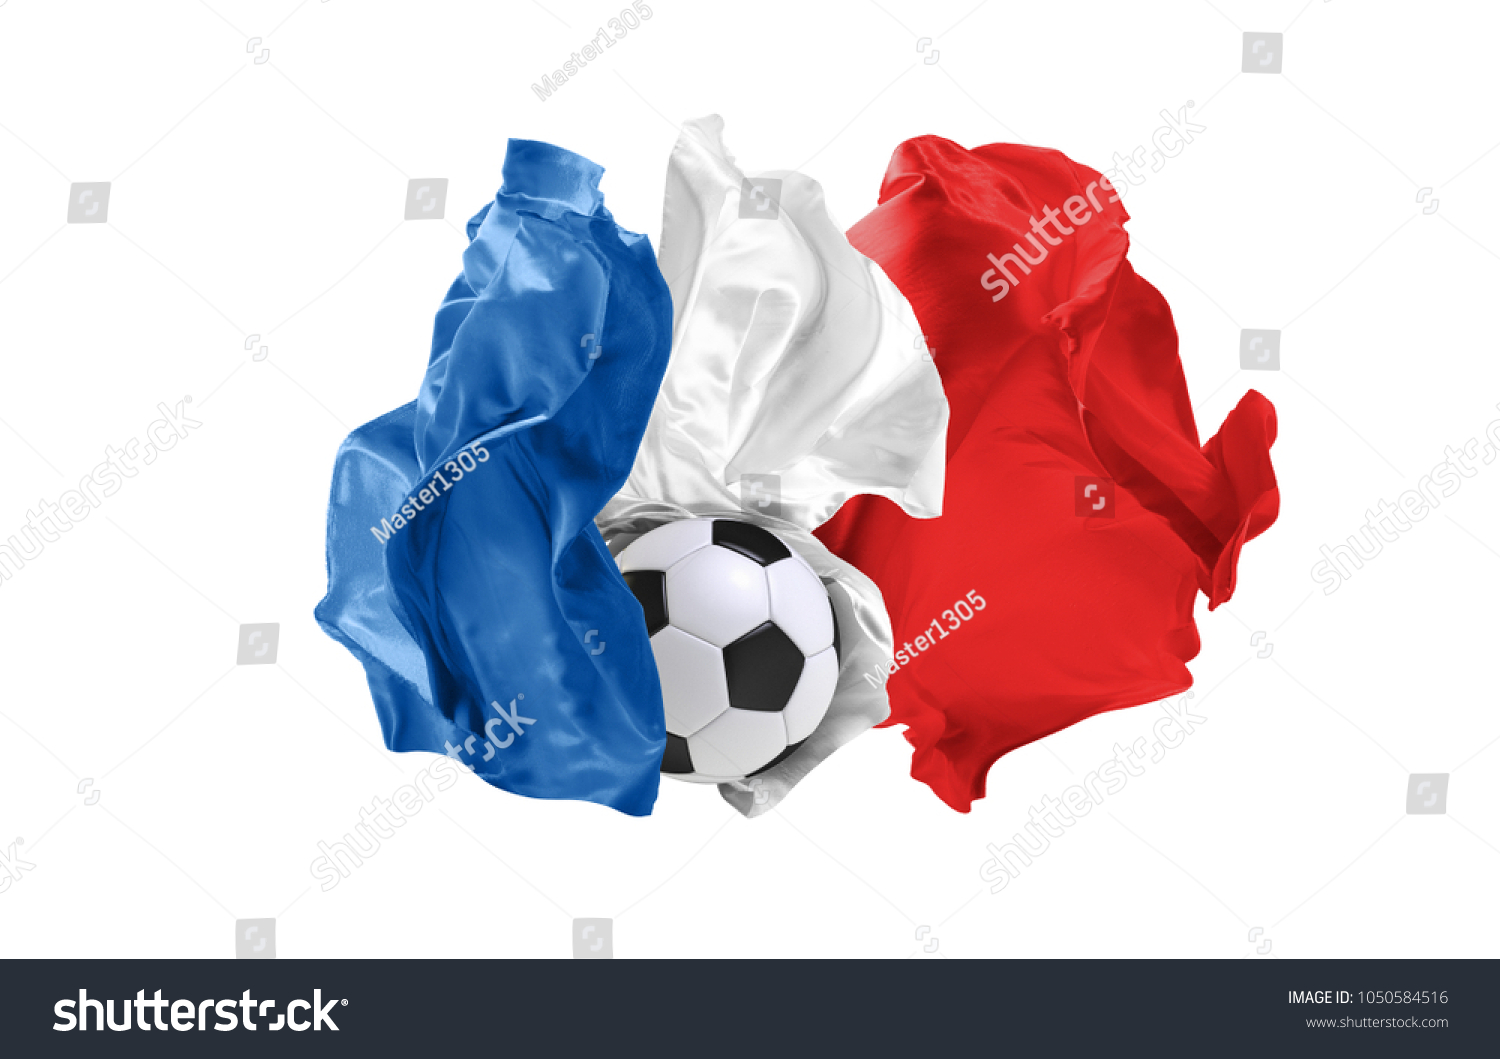 The national flag of France. . Flag made of fabric. Football and soccer concept. Fans concept. Soccer ball with fabric. Isolated on white background. Flying flag. #1050584516